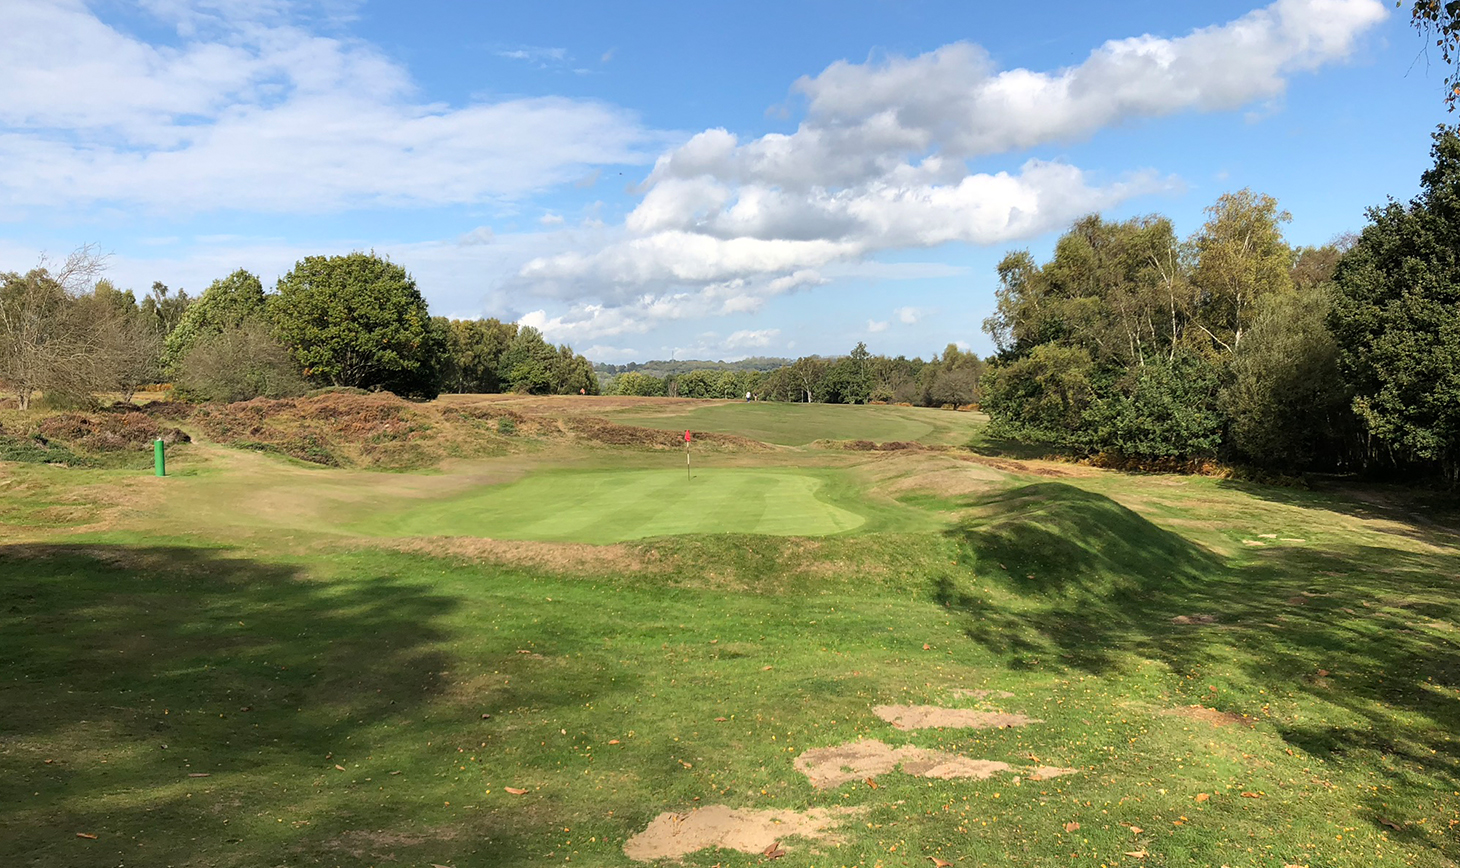 RGS Professionals Charity Golf Day 2018